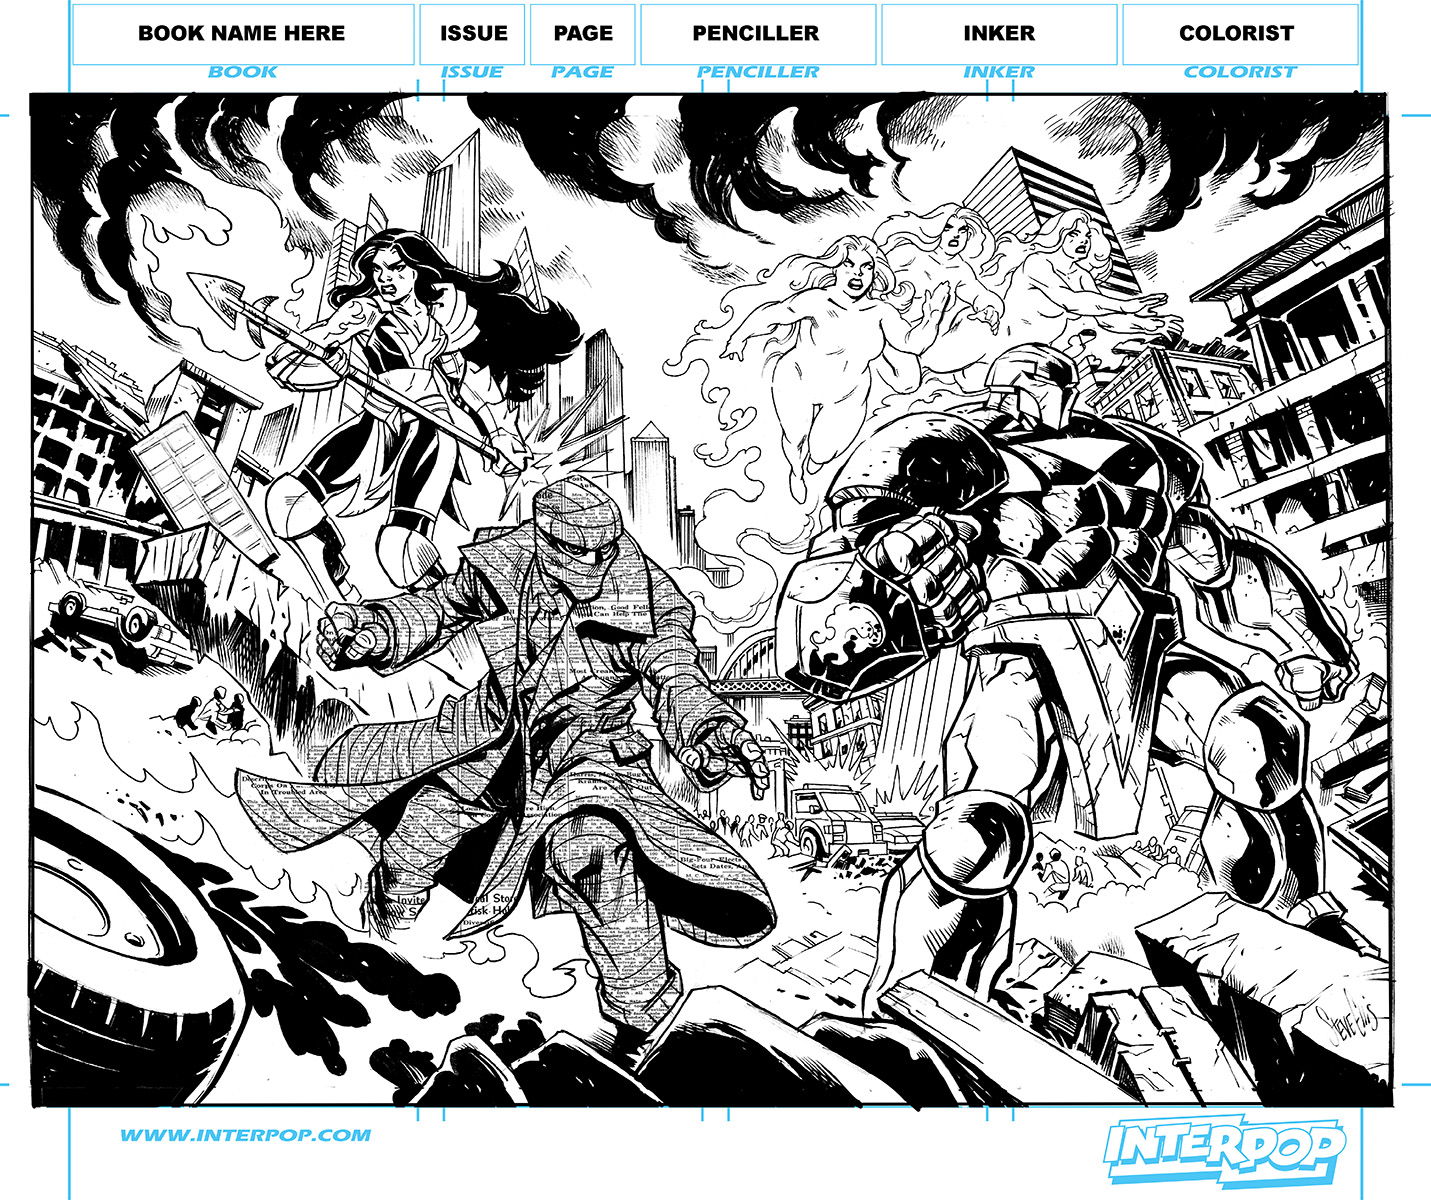 The Nine #0 page 1 inks